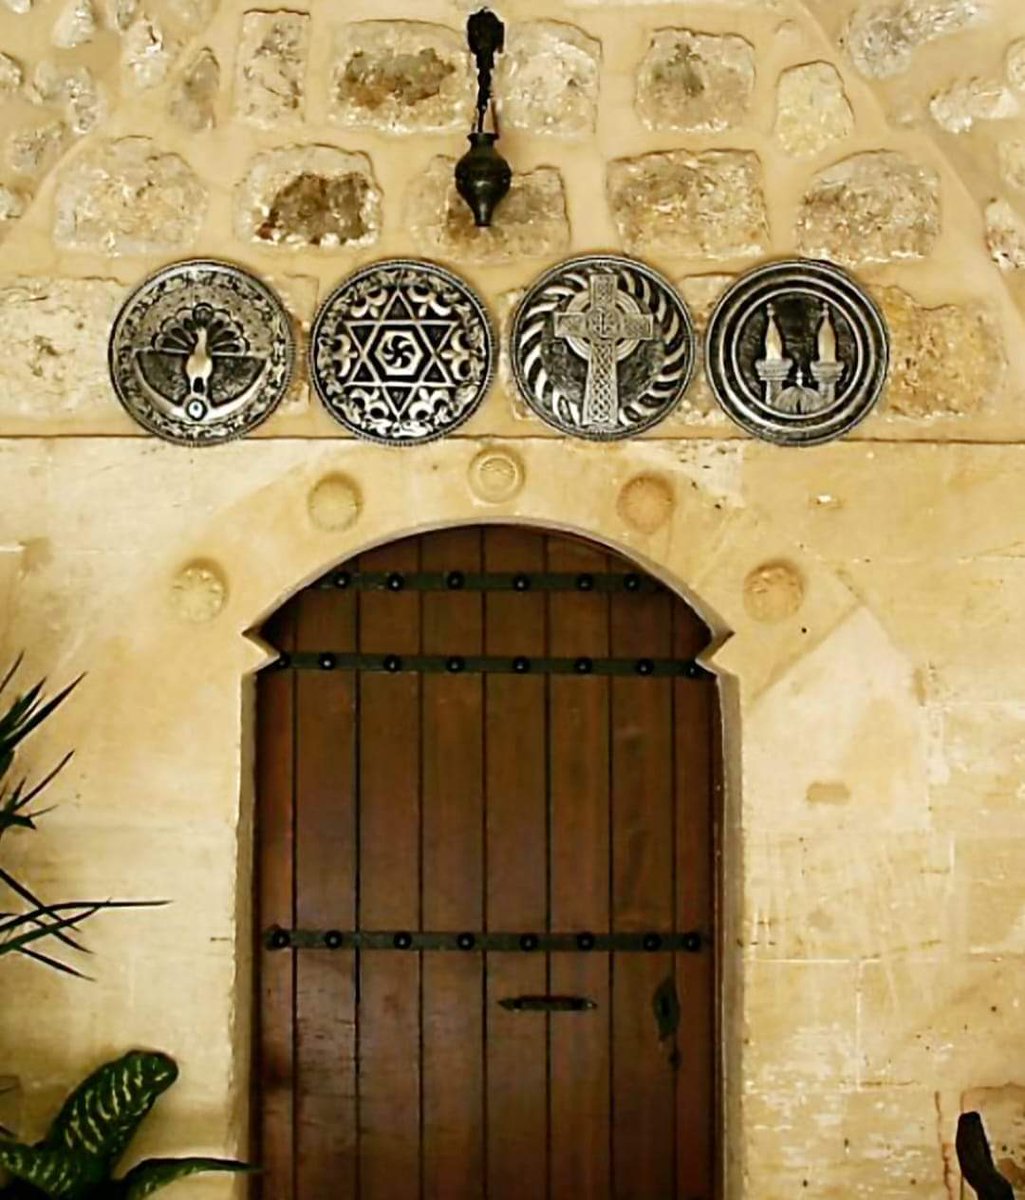 Symbols of the religions that lived and still live in Mardin, symbolizing love, tolerance and brotherhood, hung on the door at the entrance of Maridin Hotel in Mardin, Türkiye.

#drthehistories